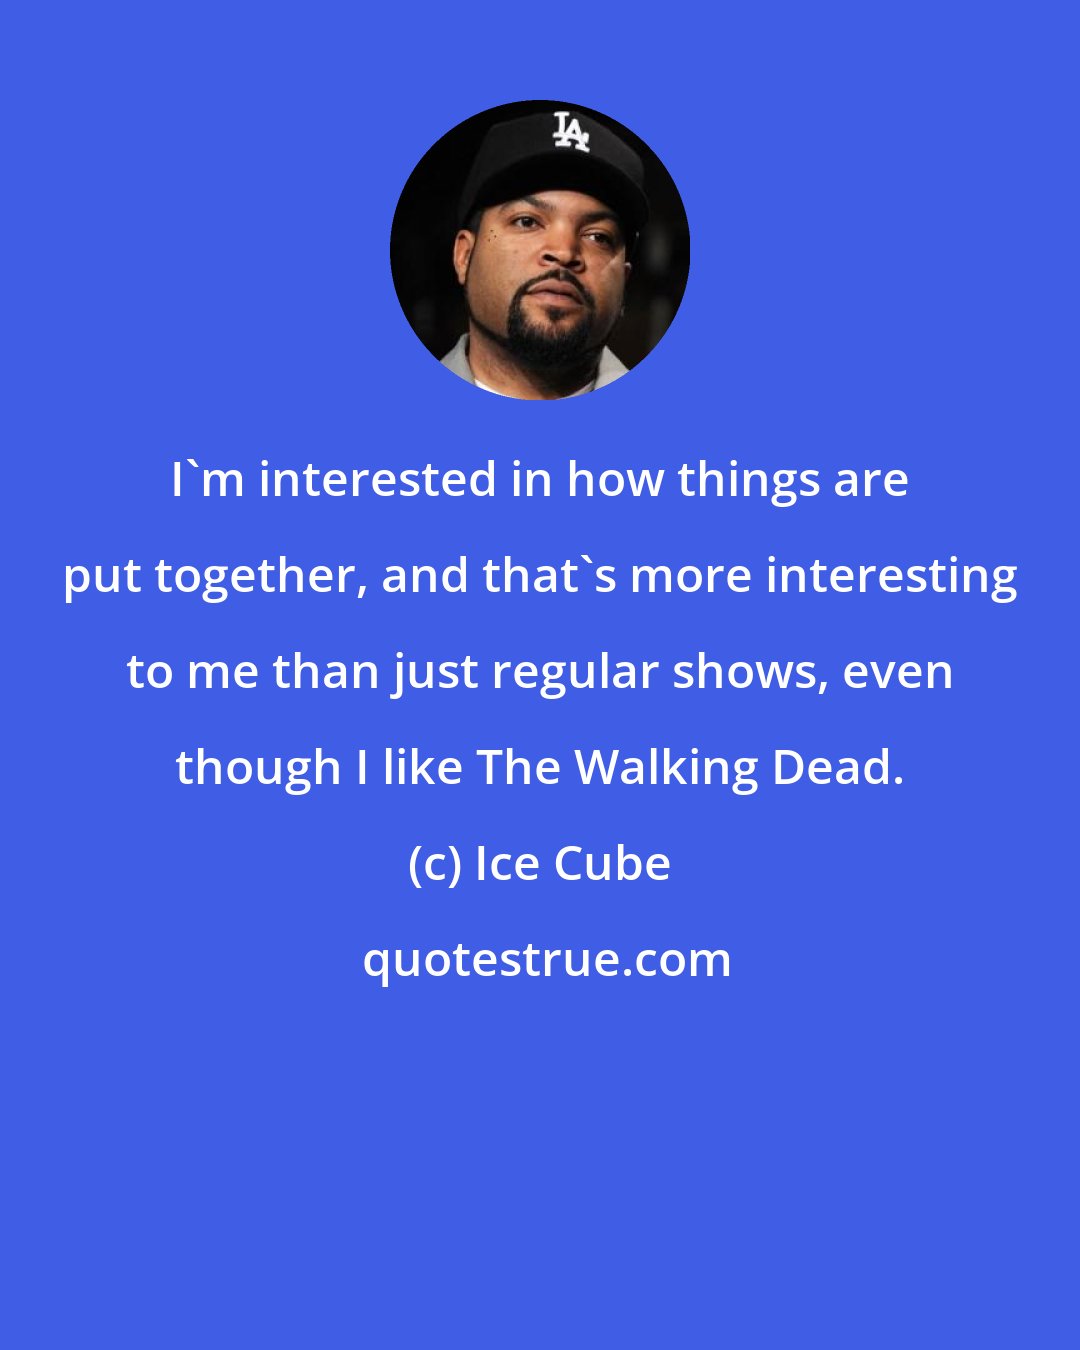 Ice Cube: I'm interested in how things are put together, and that's more interesting to me than just regular shows, even though I like The Walking Dead.